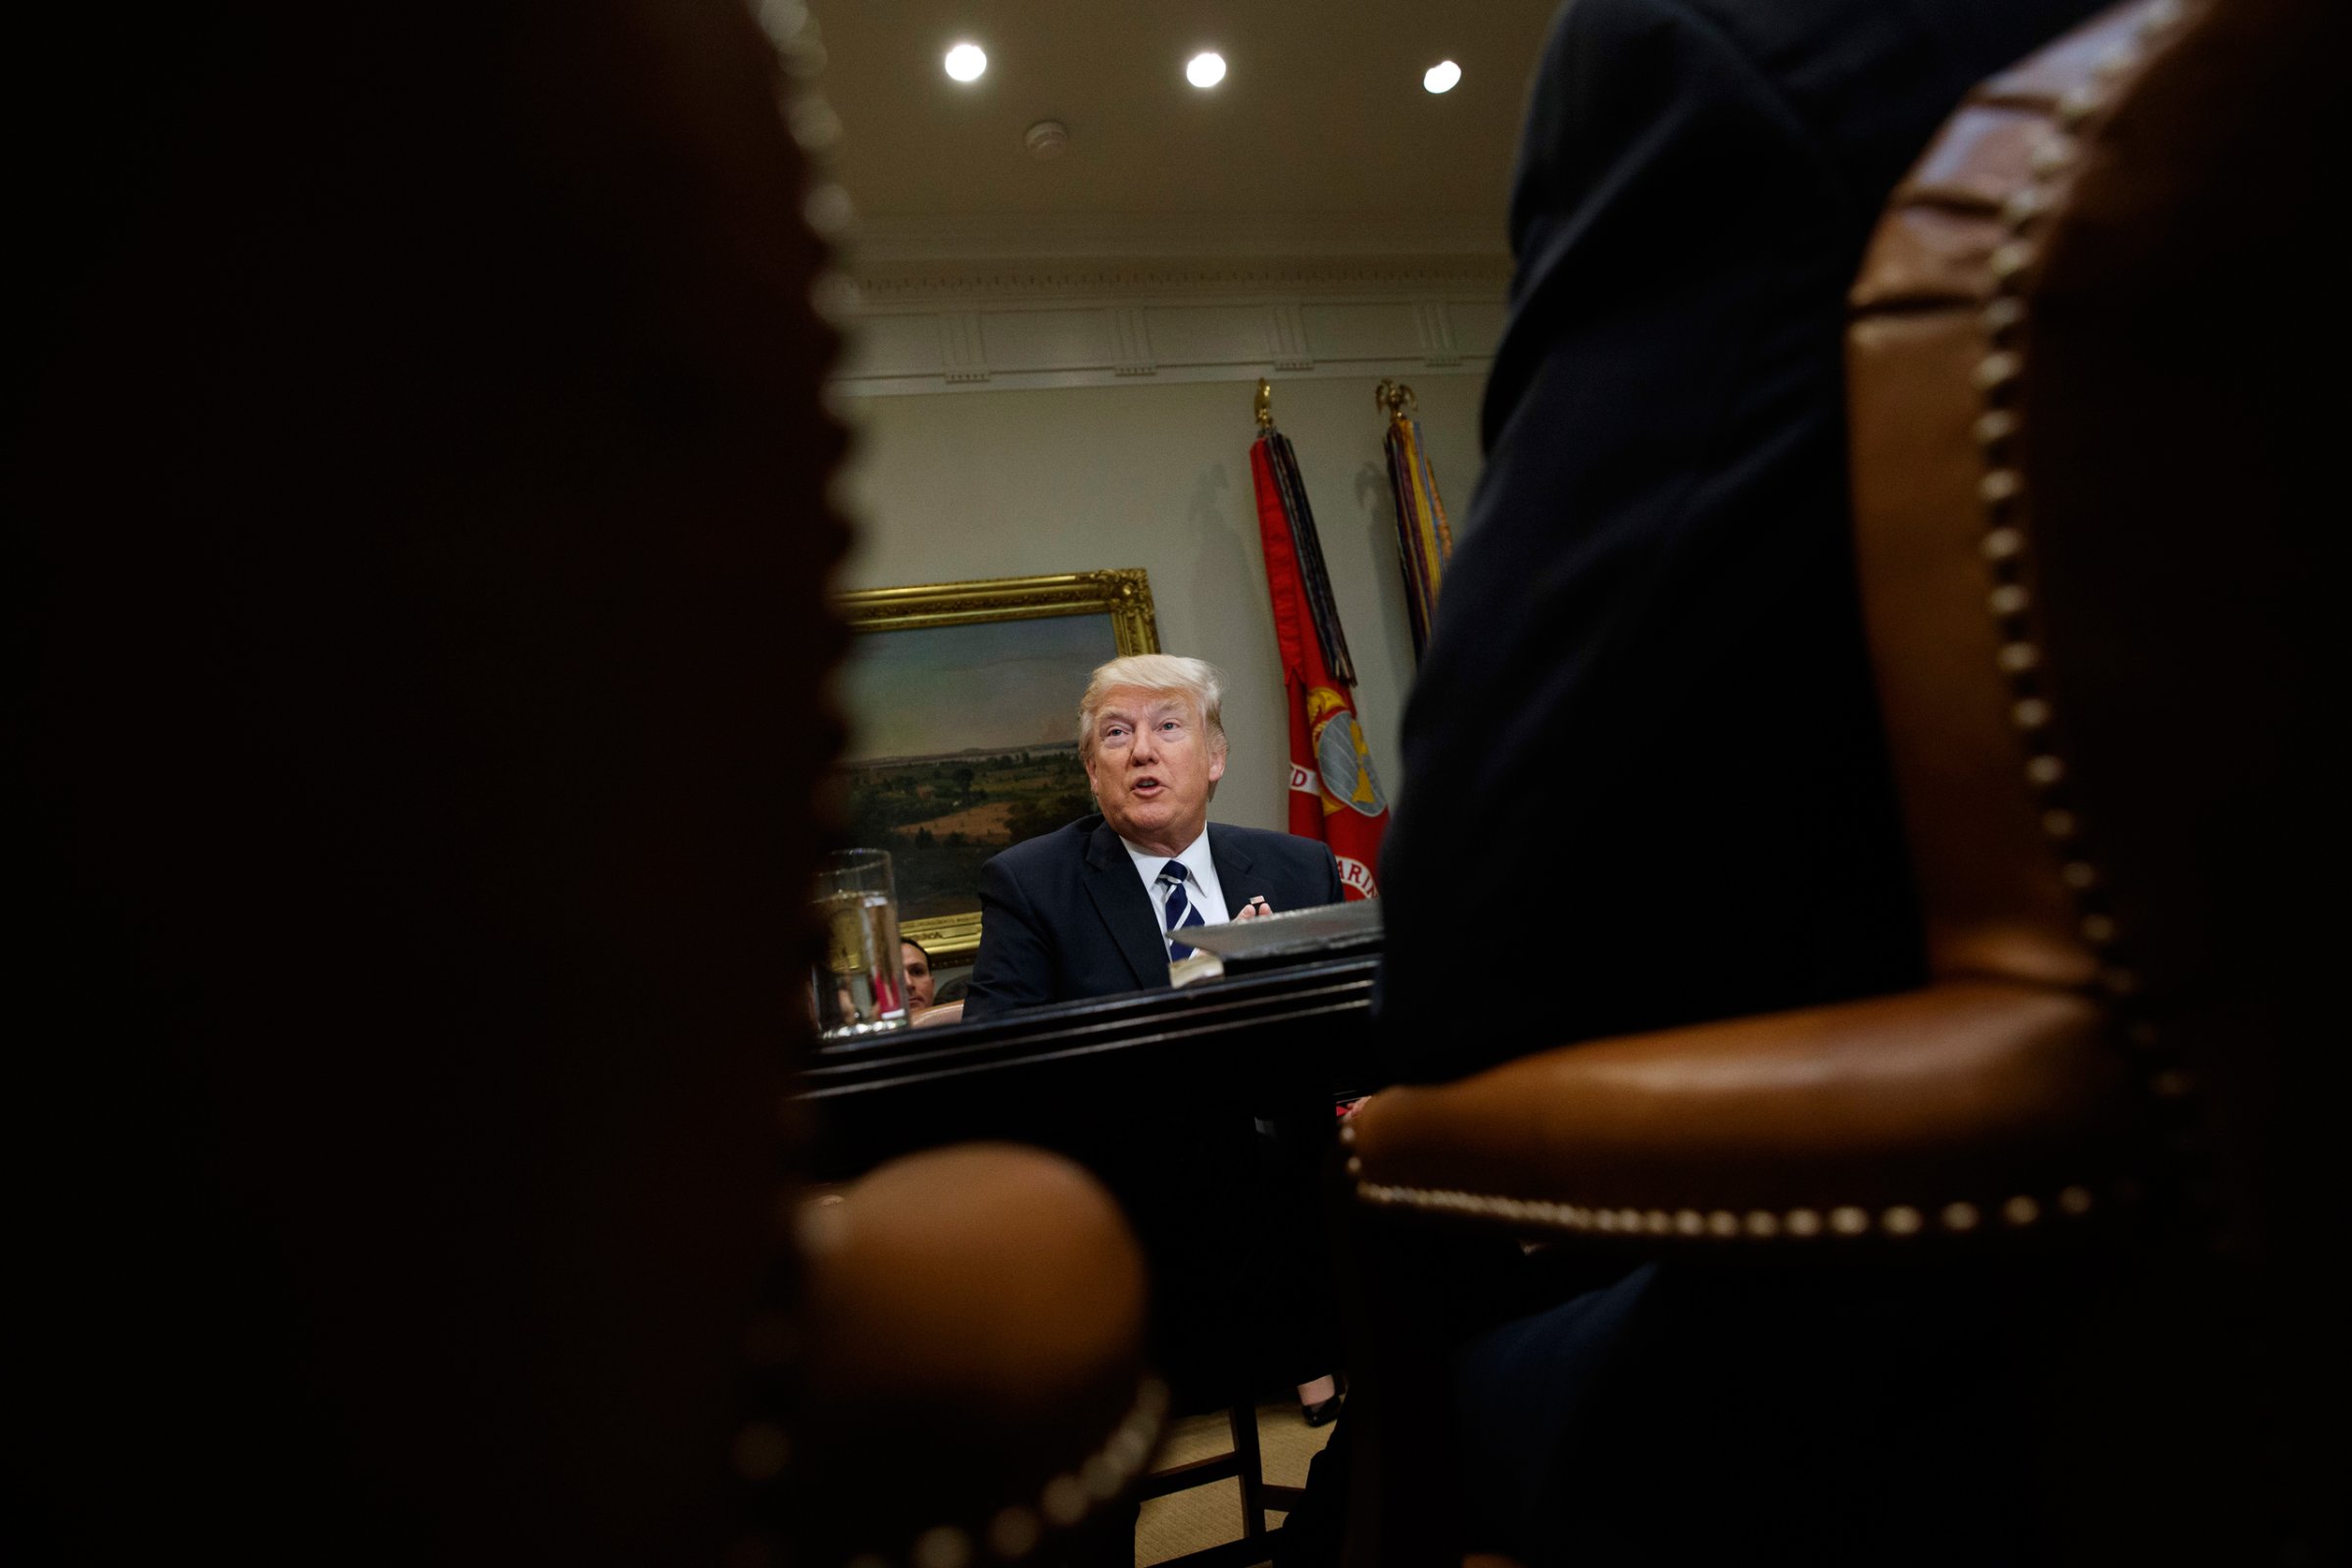 President Donald Trump speaks during a meeting with parents and teachers, Tuesday, Feb. 14, 2017, in the Roosevelt Room of the White House in Washington. (AP Photo/Evan Vucci)